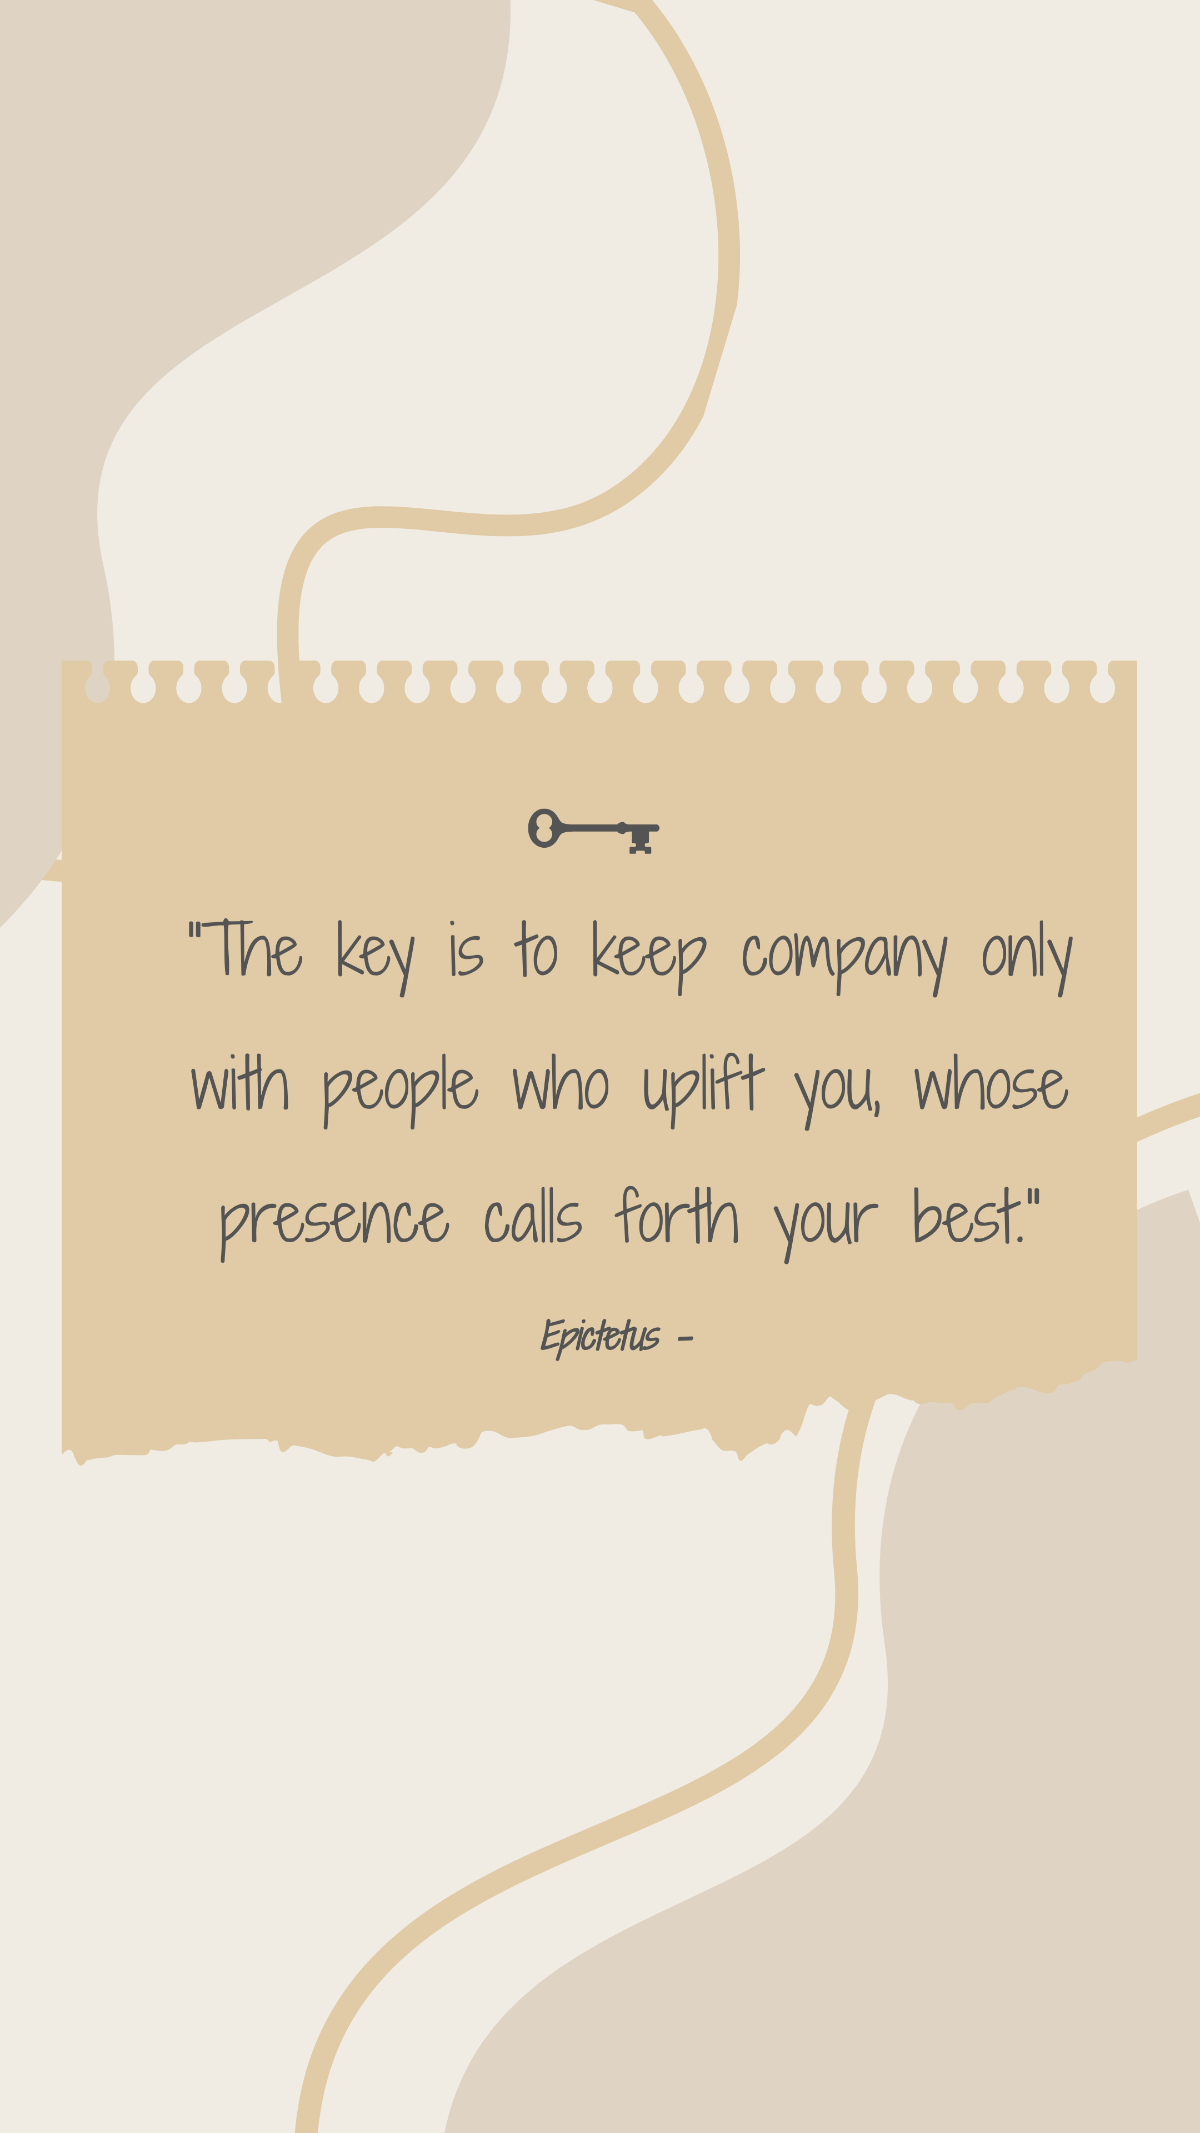 Epictetus - The key is to keep company only with people who uplift you, whose presence calls forth your best. Template